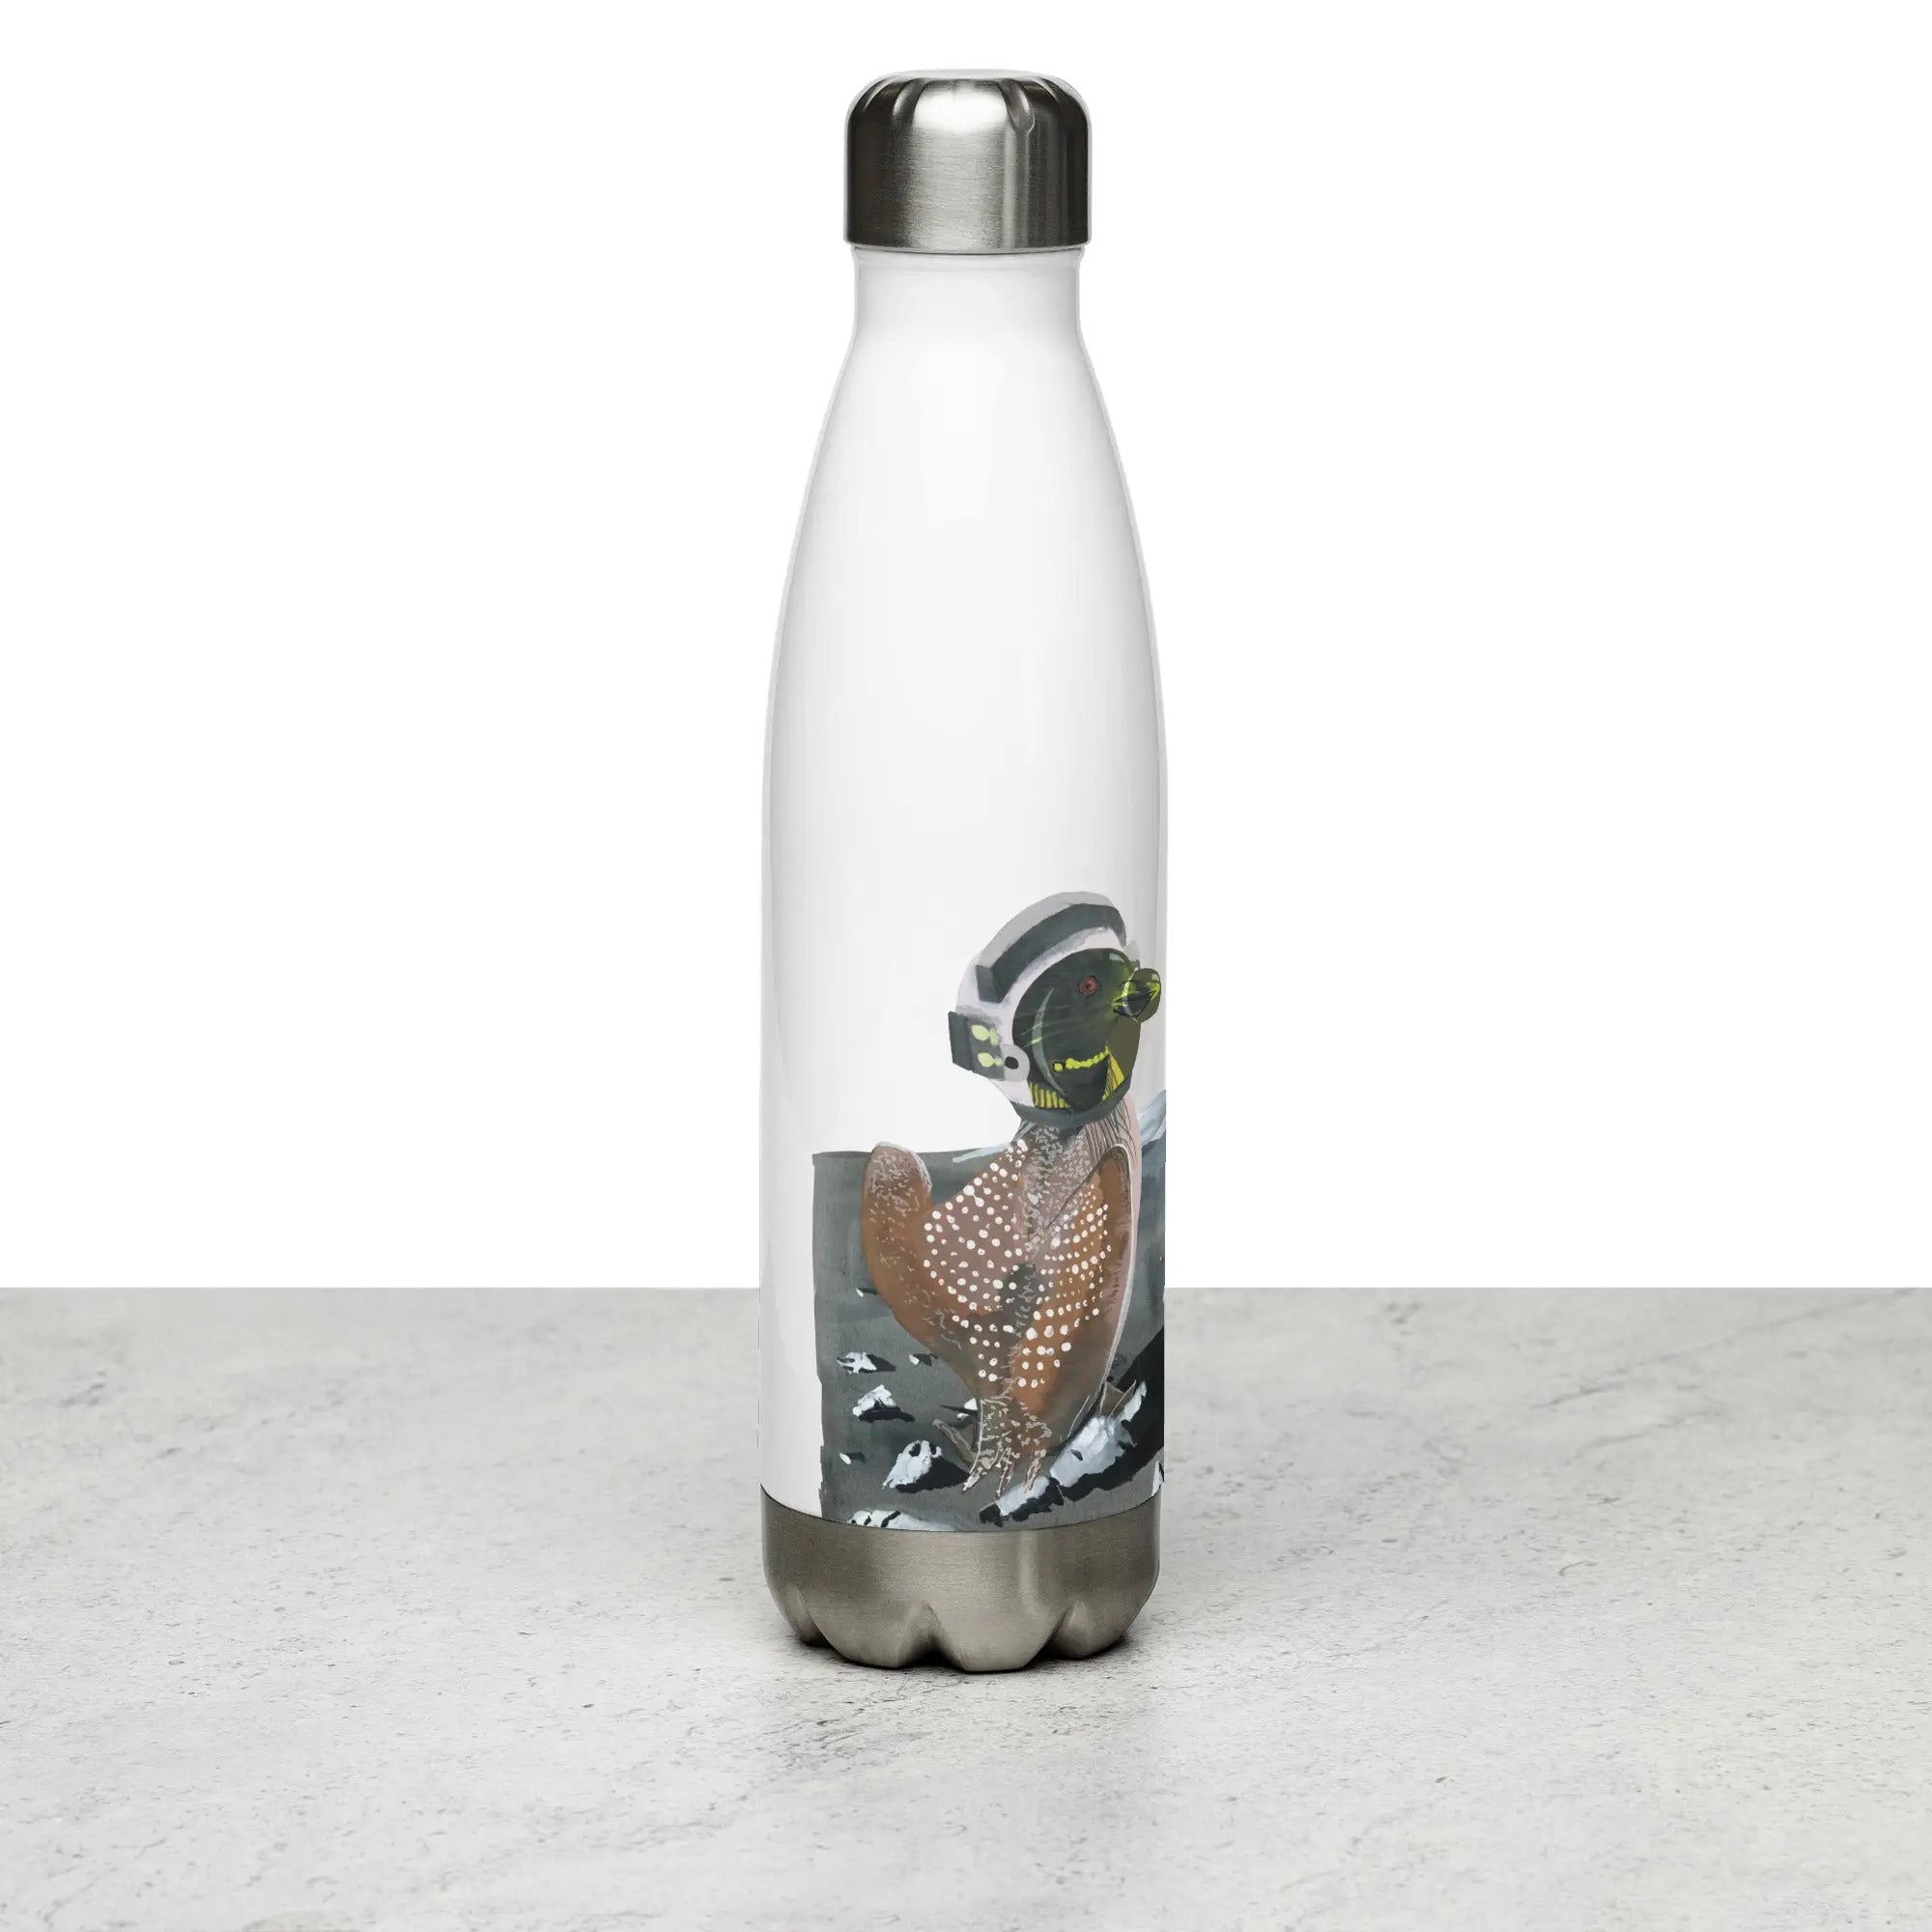 Stainless steel water bottle with bird design from Loonar Landing